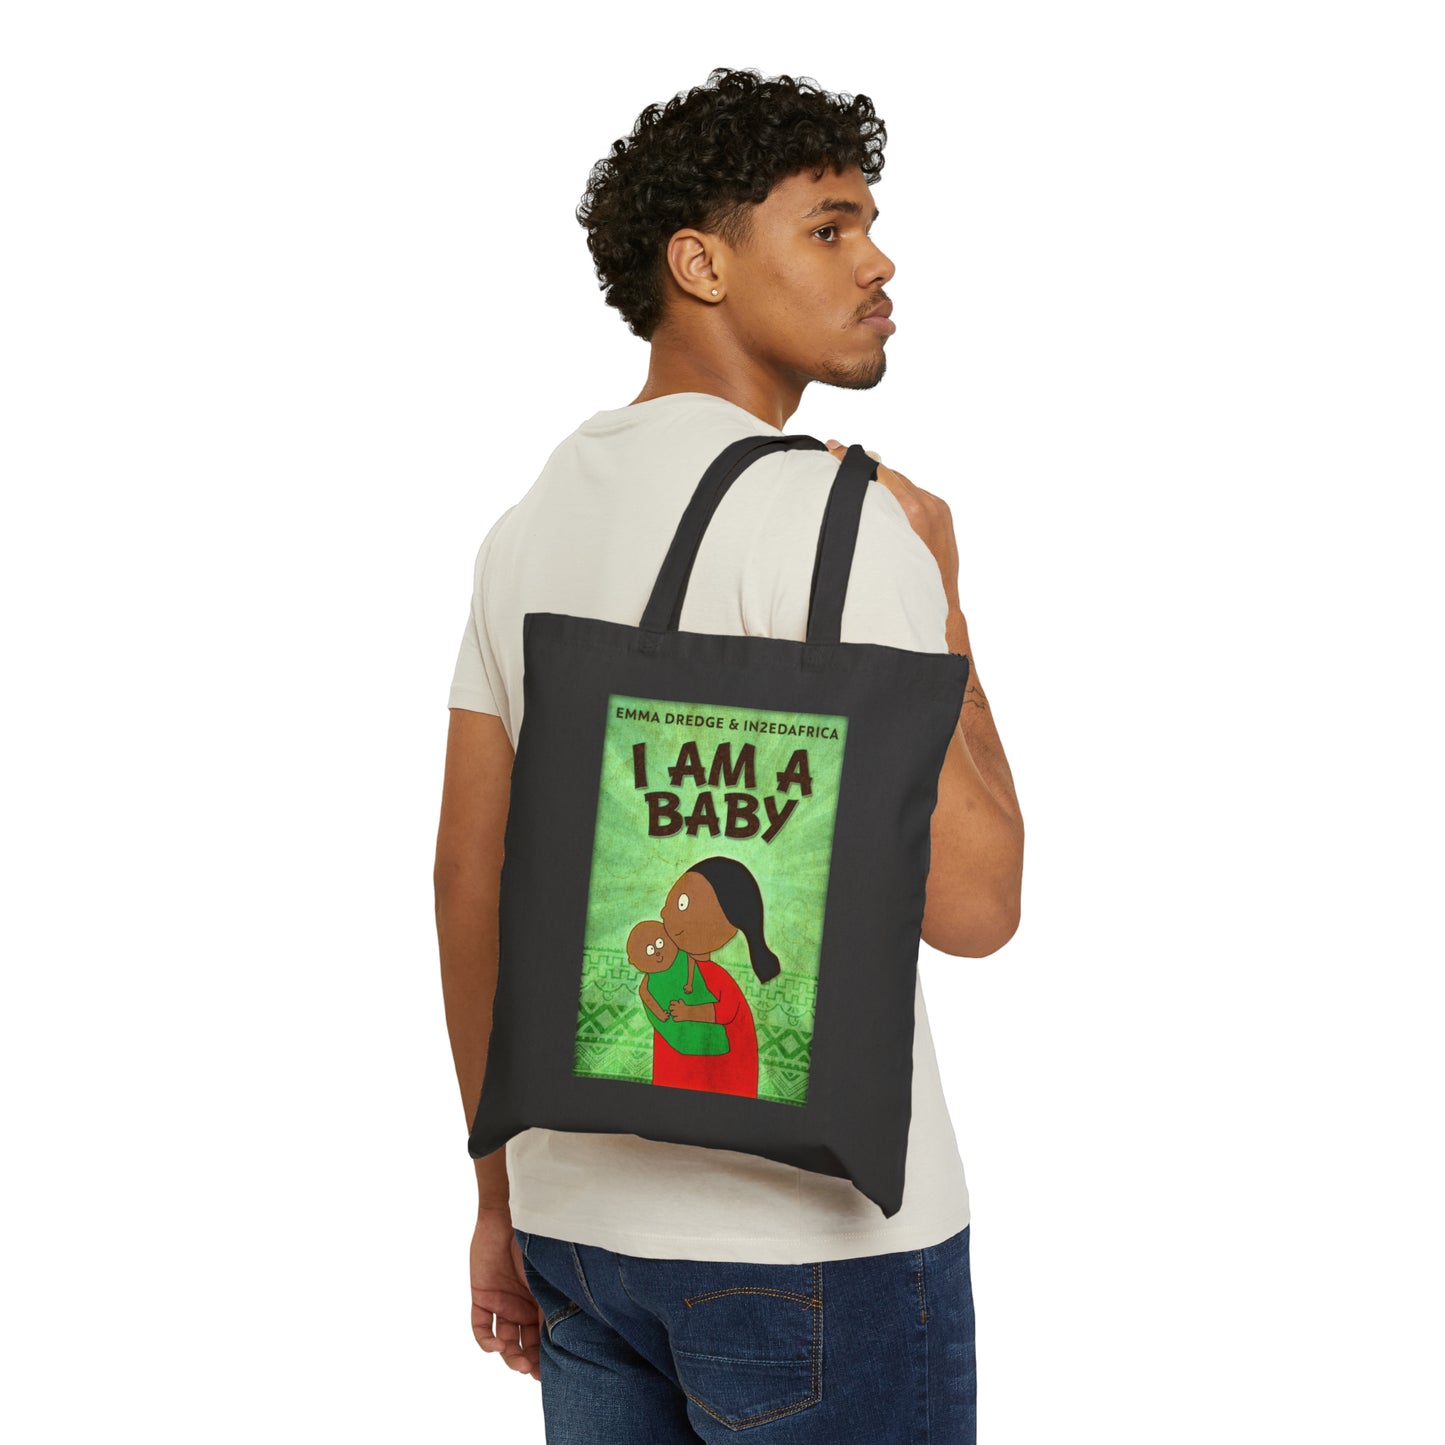 I Am A Baby - Cotton Canvas Tote Bag